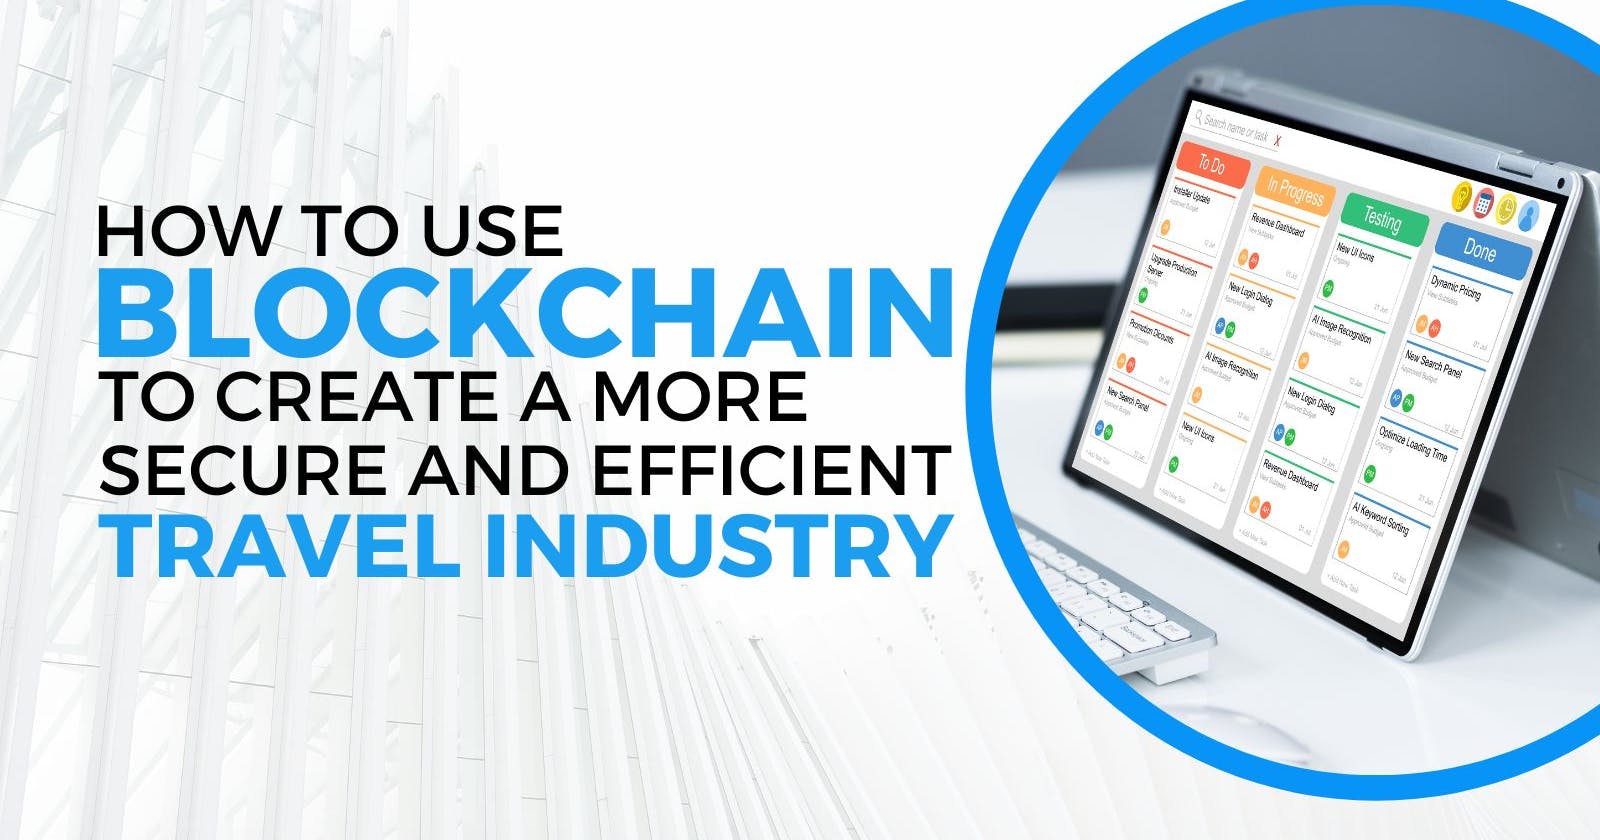 How to Use Blockchain to Create a More Secure and Efficient Travel Industry